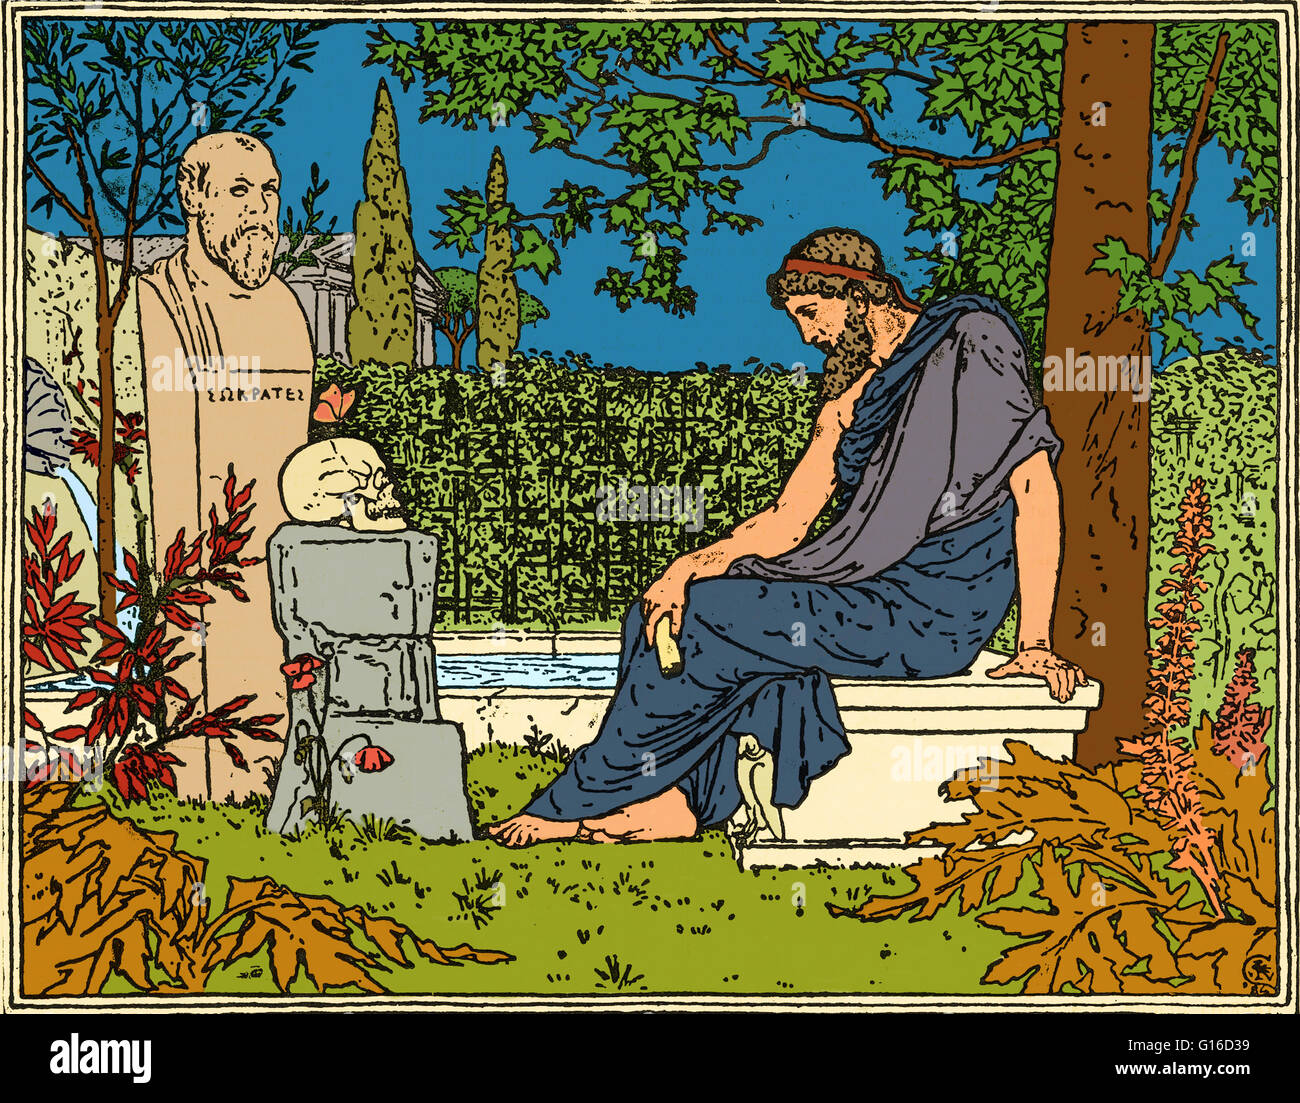 Plato meditating on immortality before Socrates, the butterfly, skull and poppy, about 400 B.C. Plato (424/423-348/347 BC) was a Classical Greek philosopher, mathematician, student of Socrates, writer of philosophical dialogues, and founder of the Academy Stock Photo